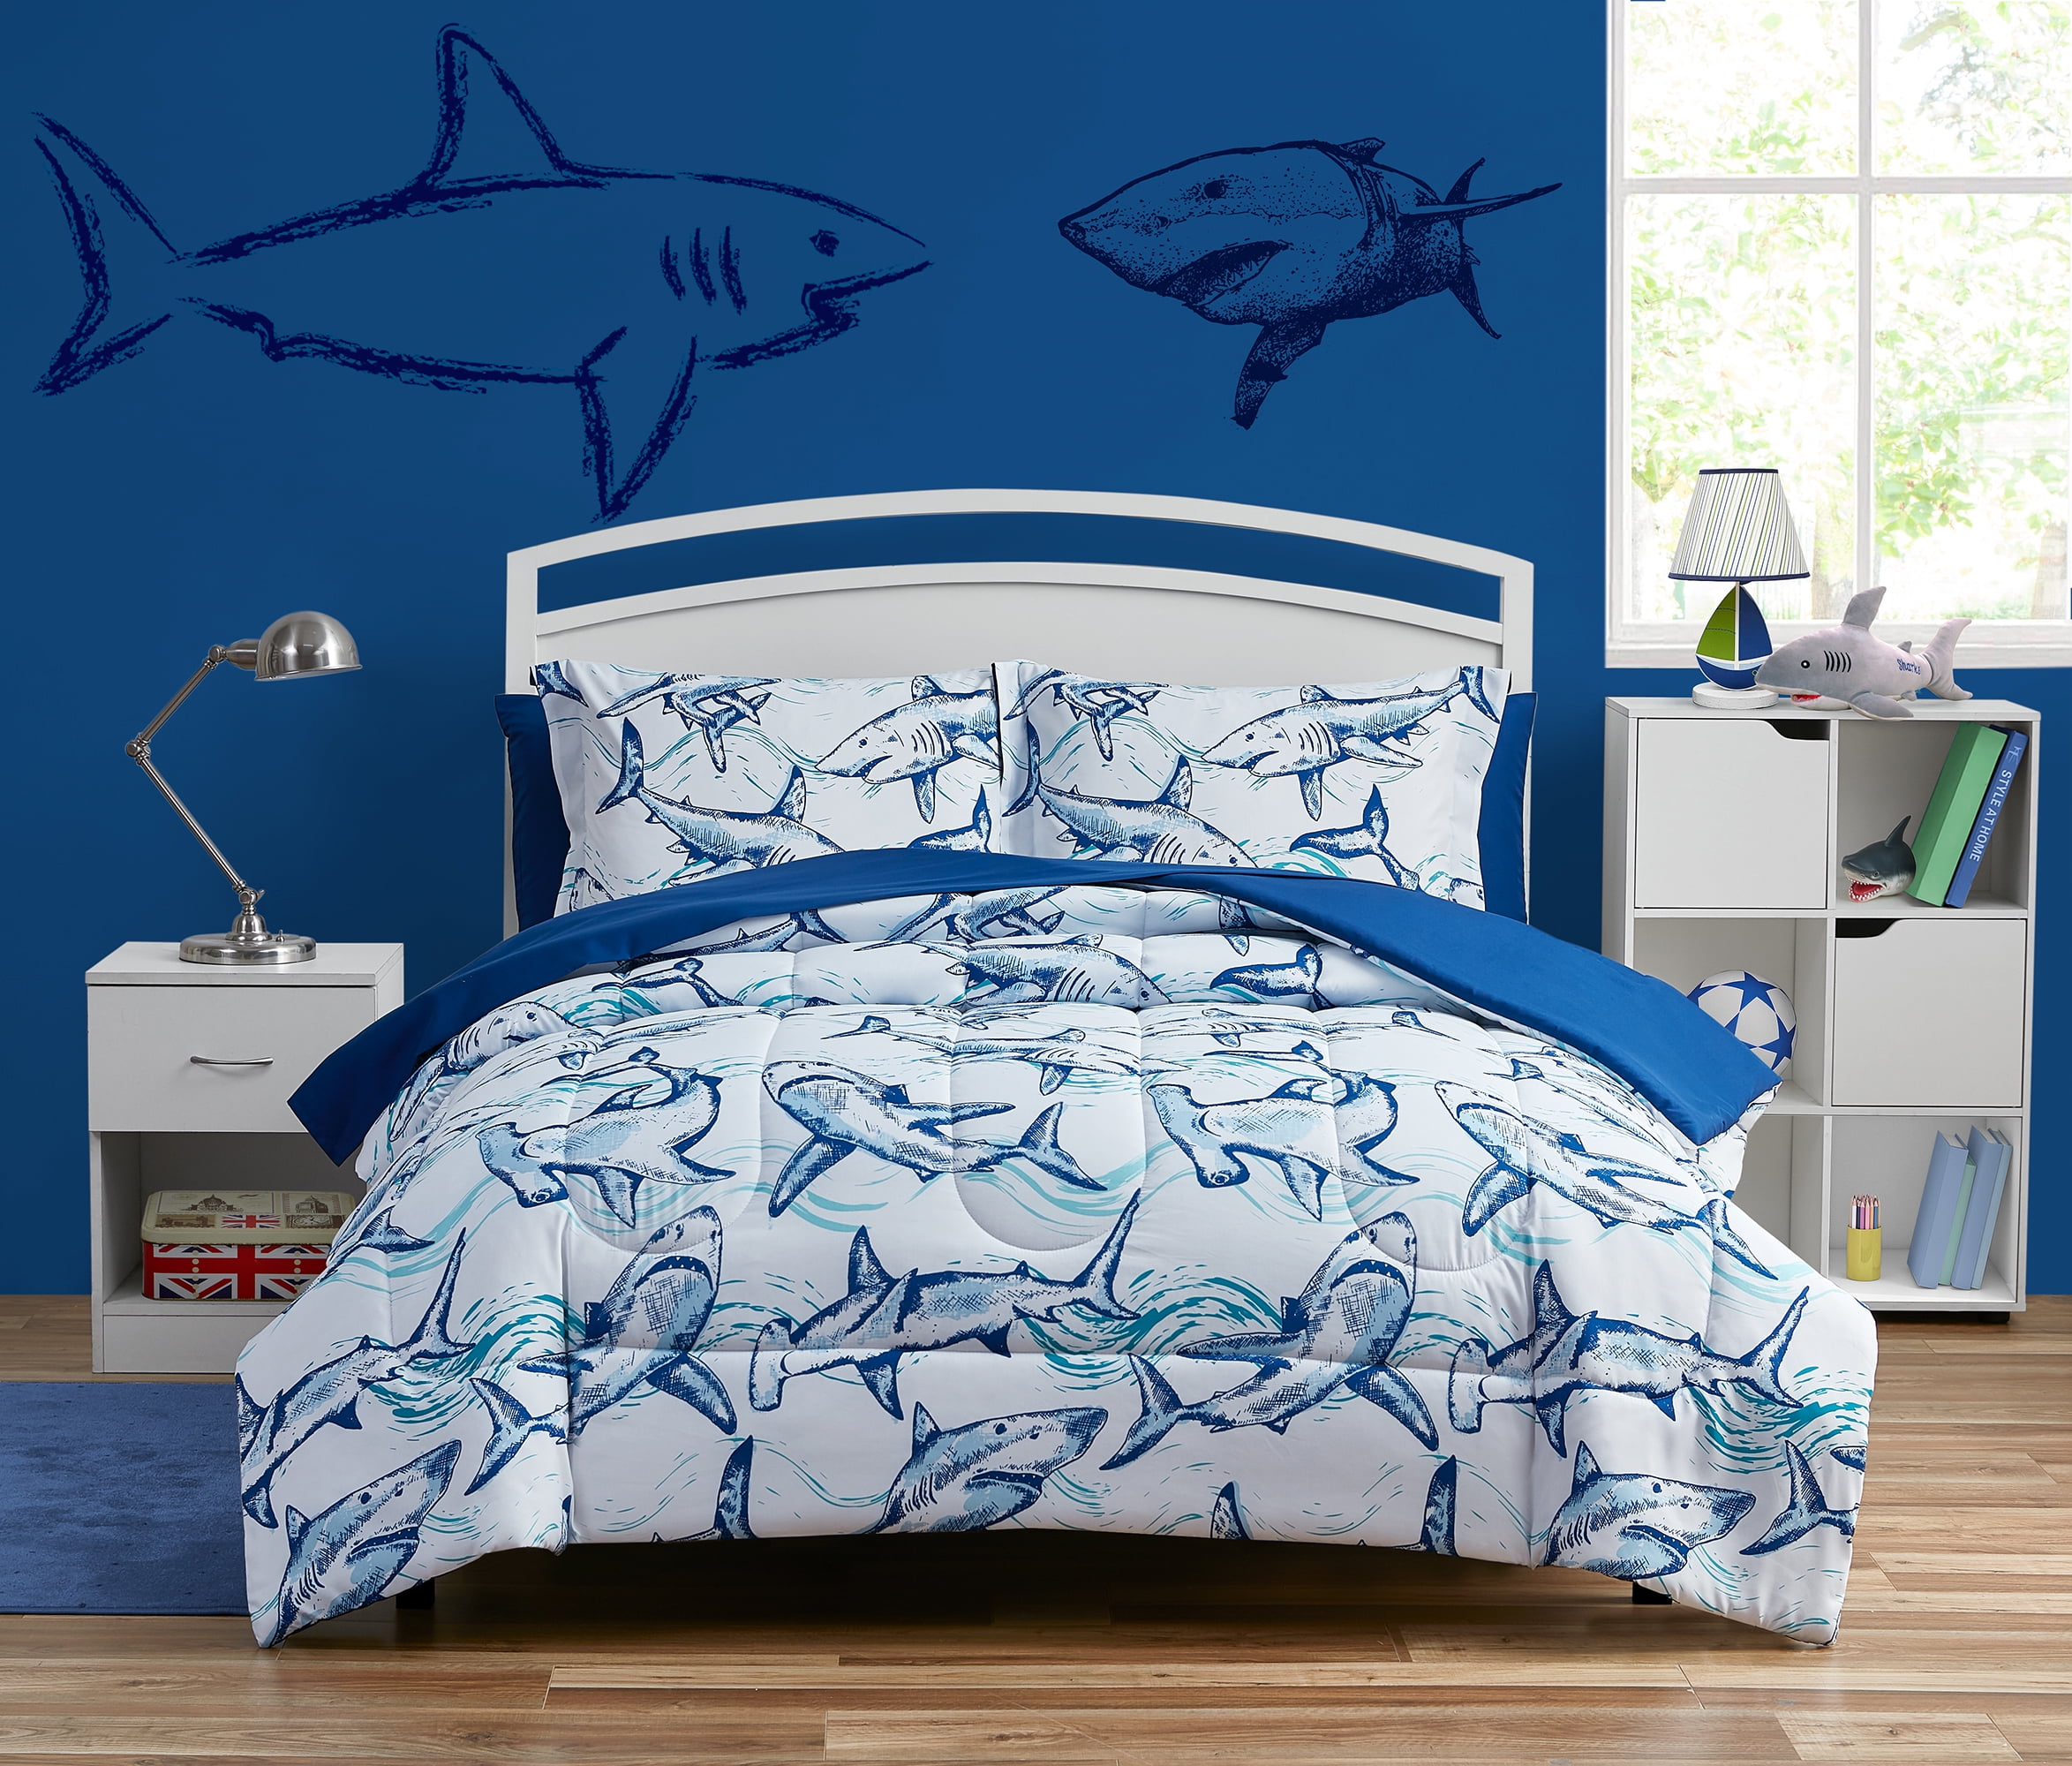 Your Zone Shark Bed in a Bag Bedding Set Full or Twin Blue 